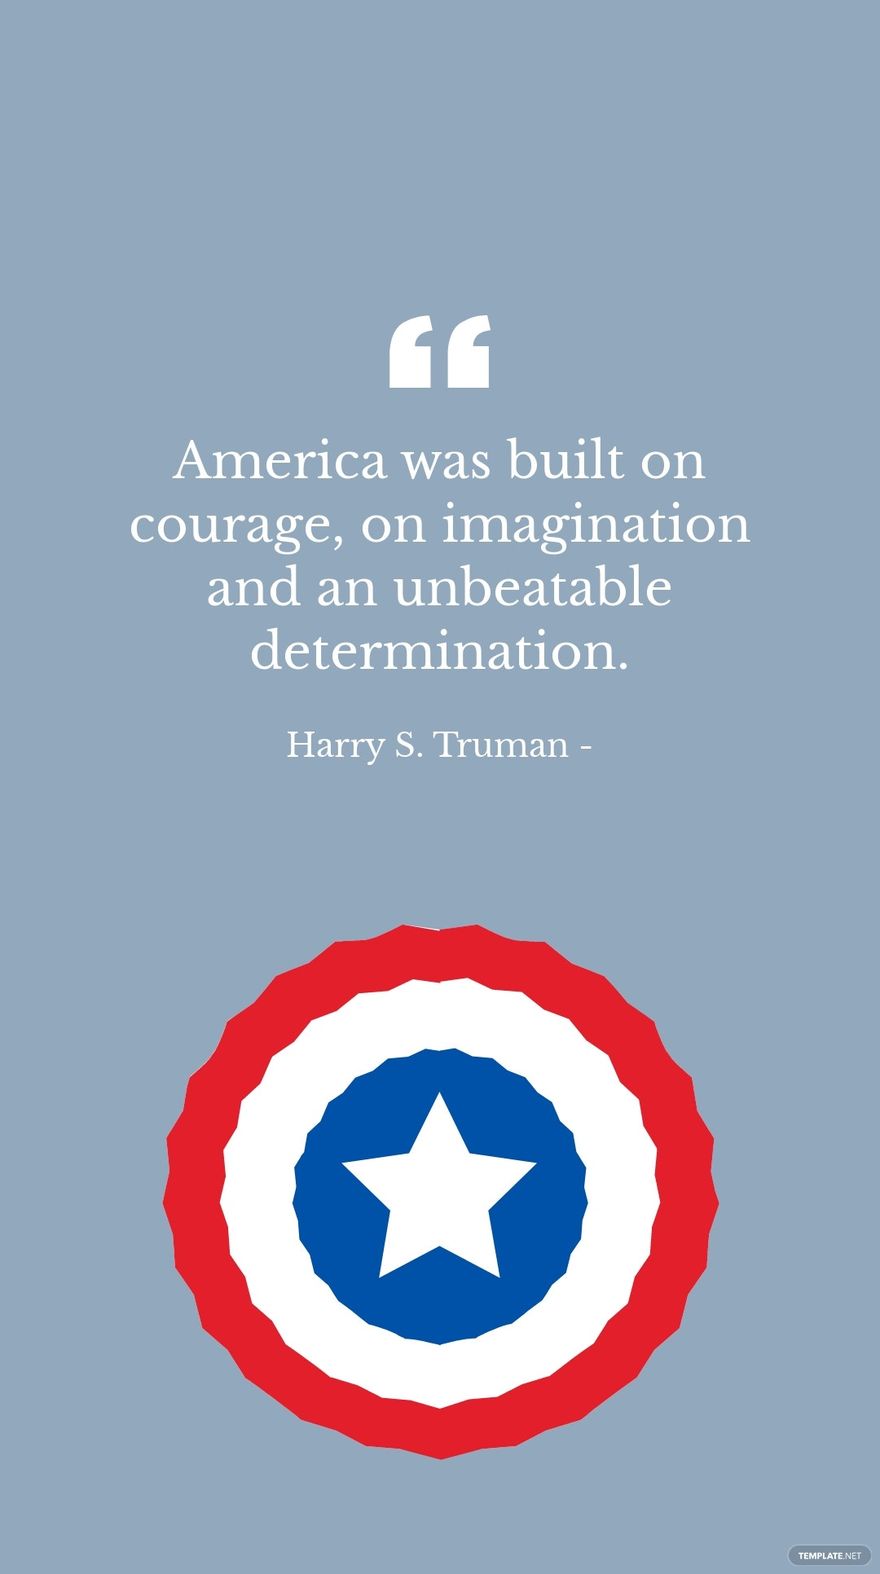 Harry S. Truman - America was built on courage, on imagination and an unbeatable determination.